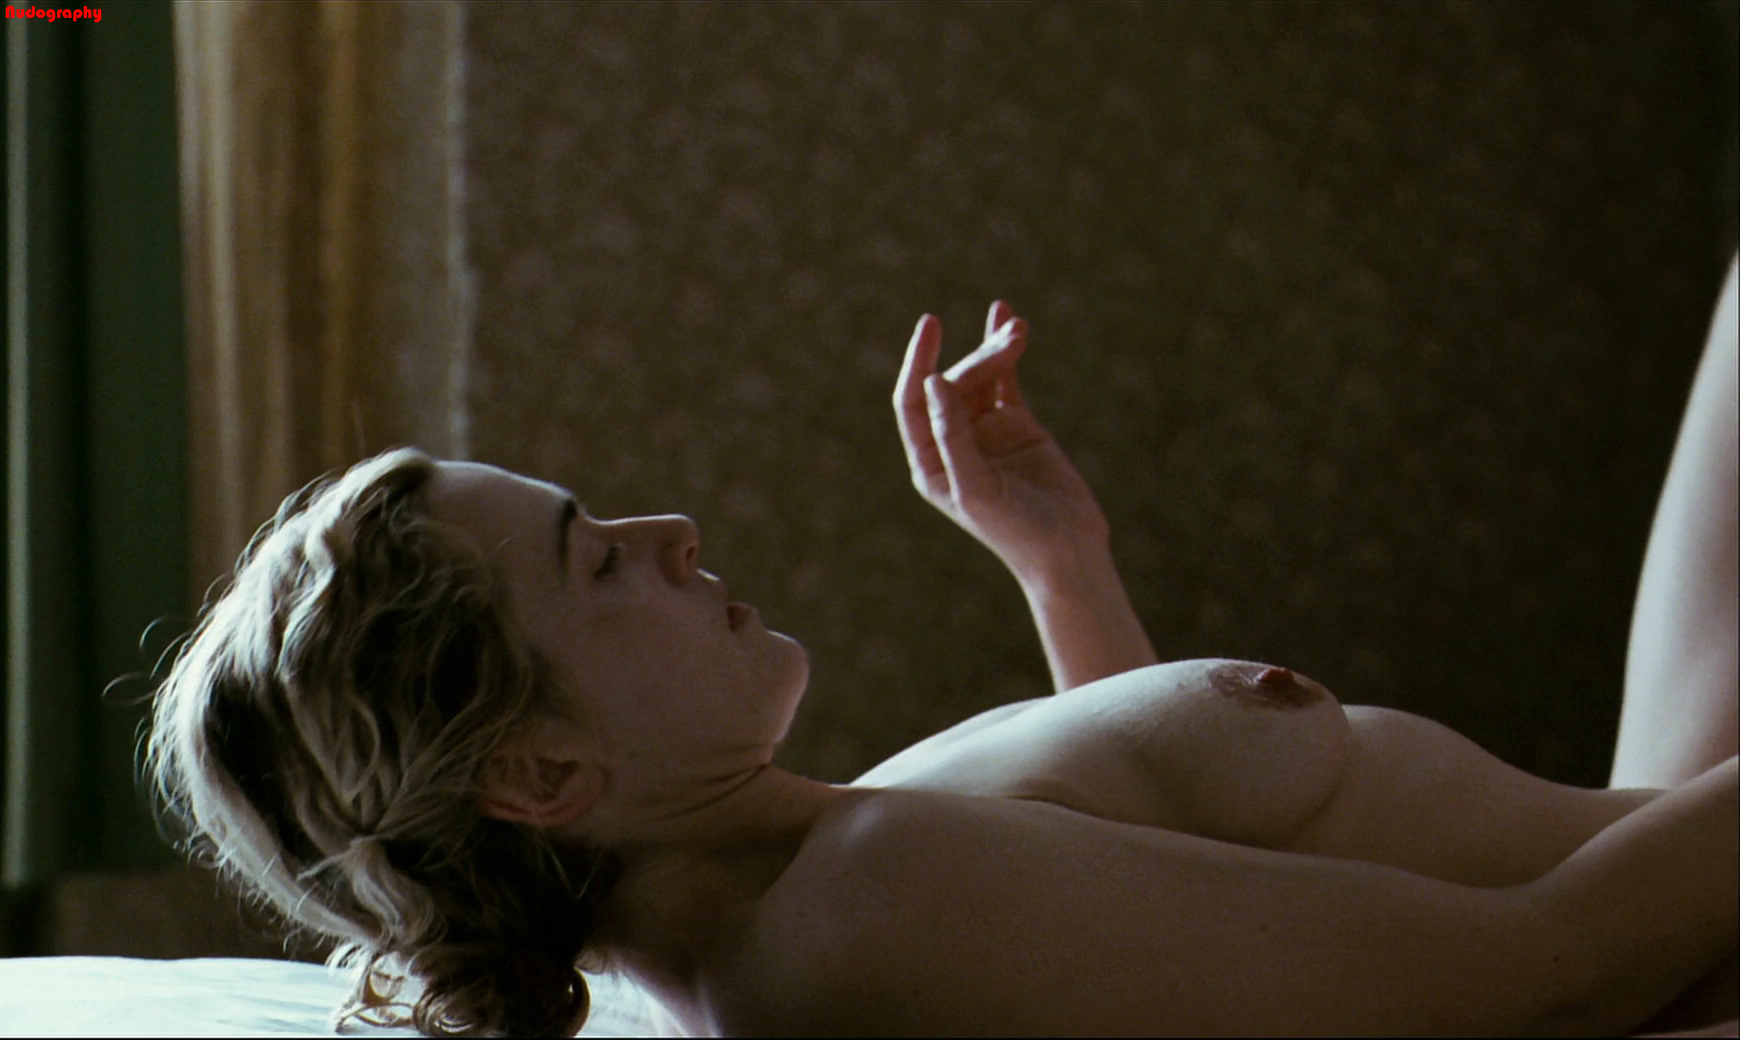 Nude Celebs In Hd Kate Winslet Picture 2009 6 Original Kate